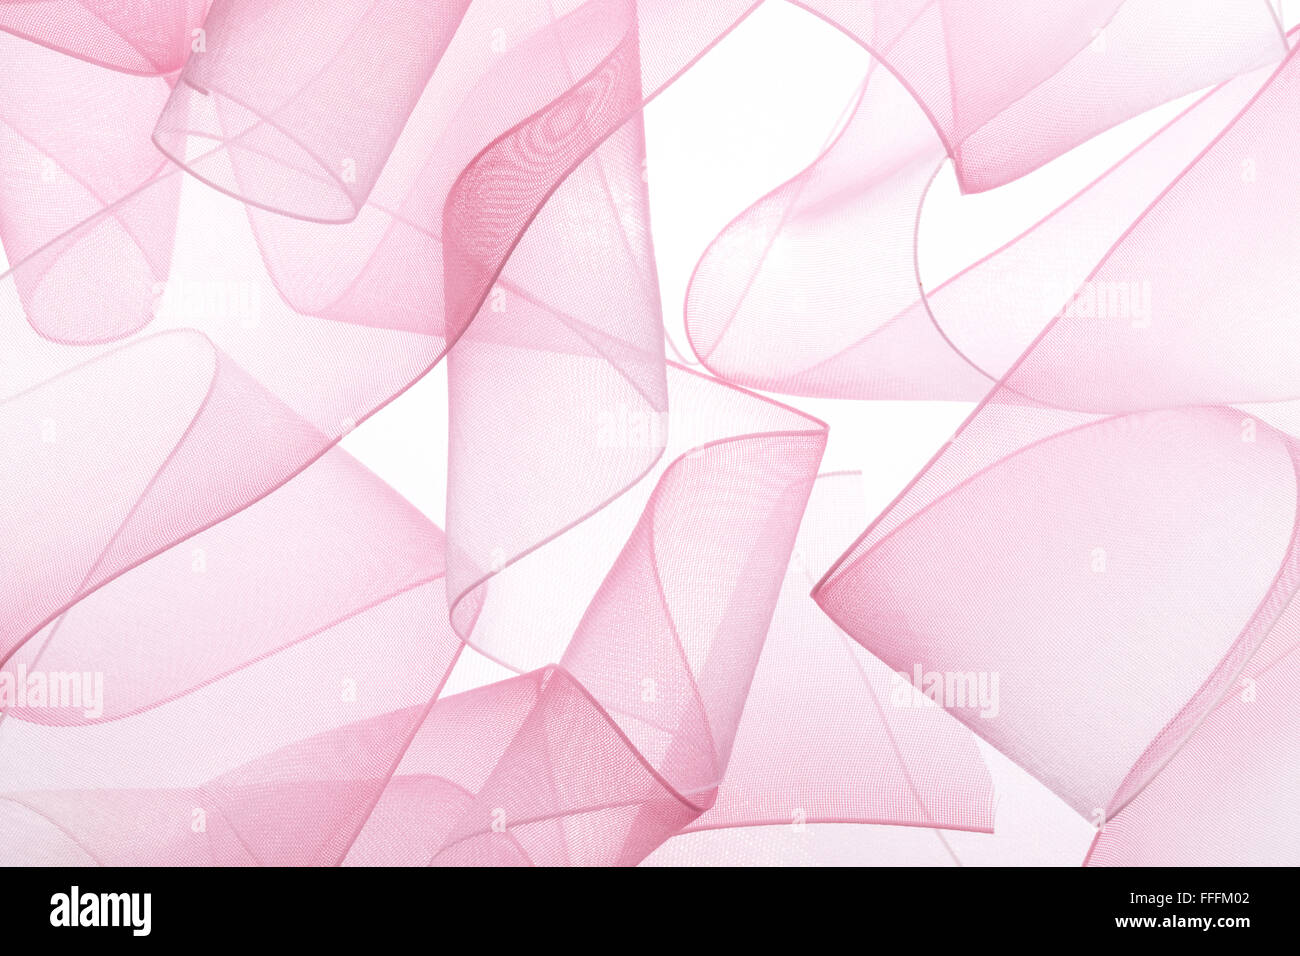 Abstract curly satin,satin background Stock Photo